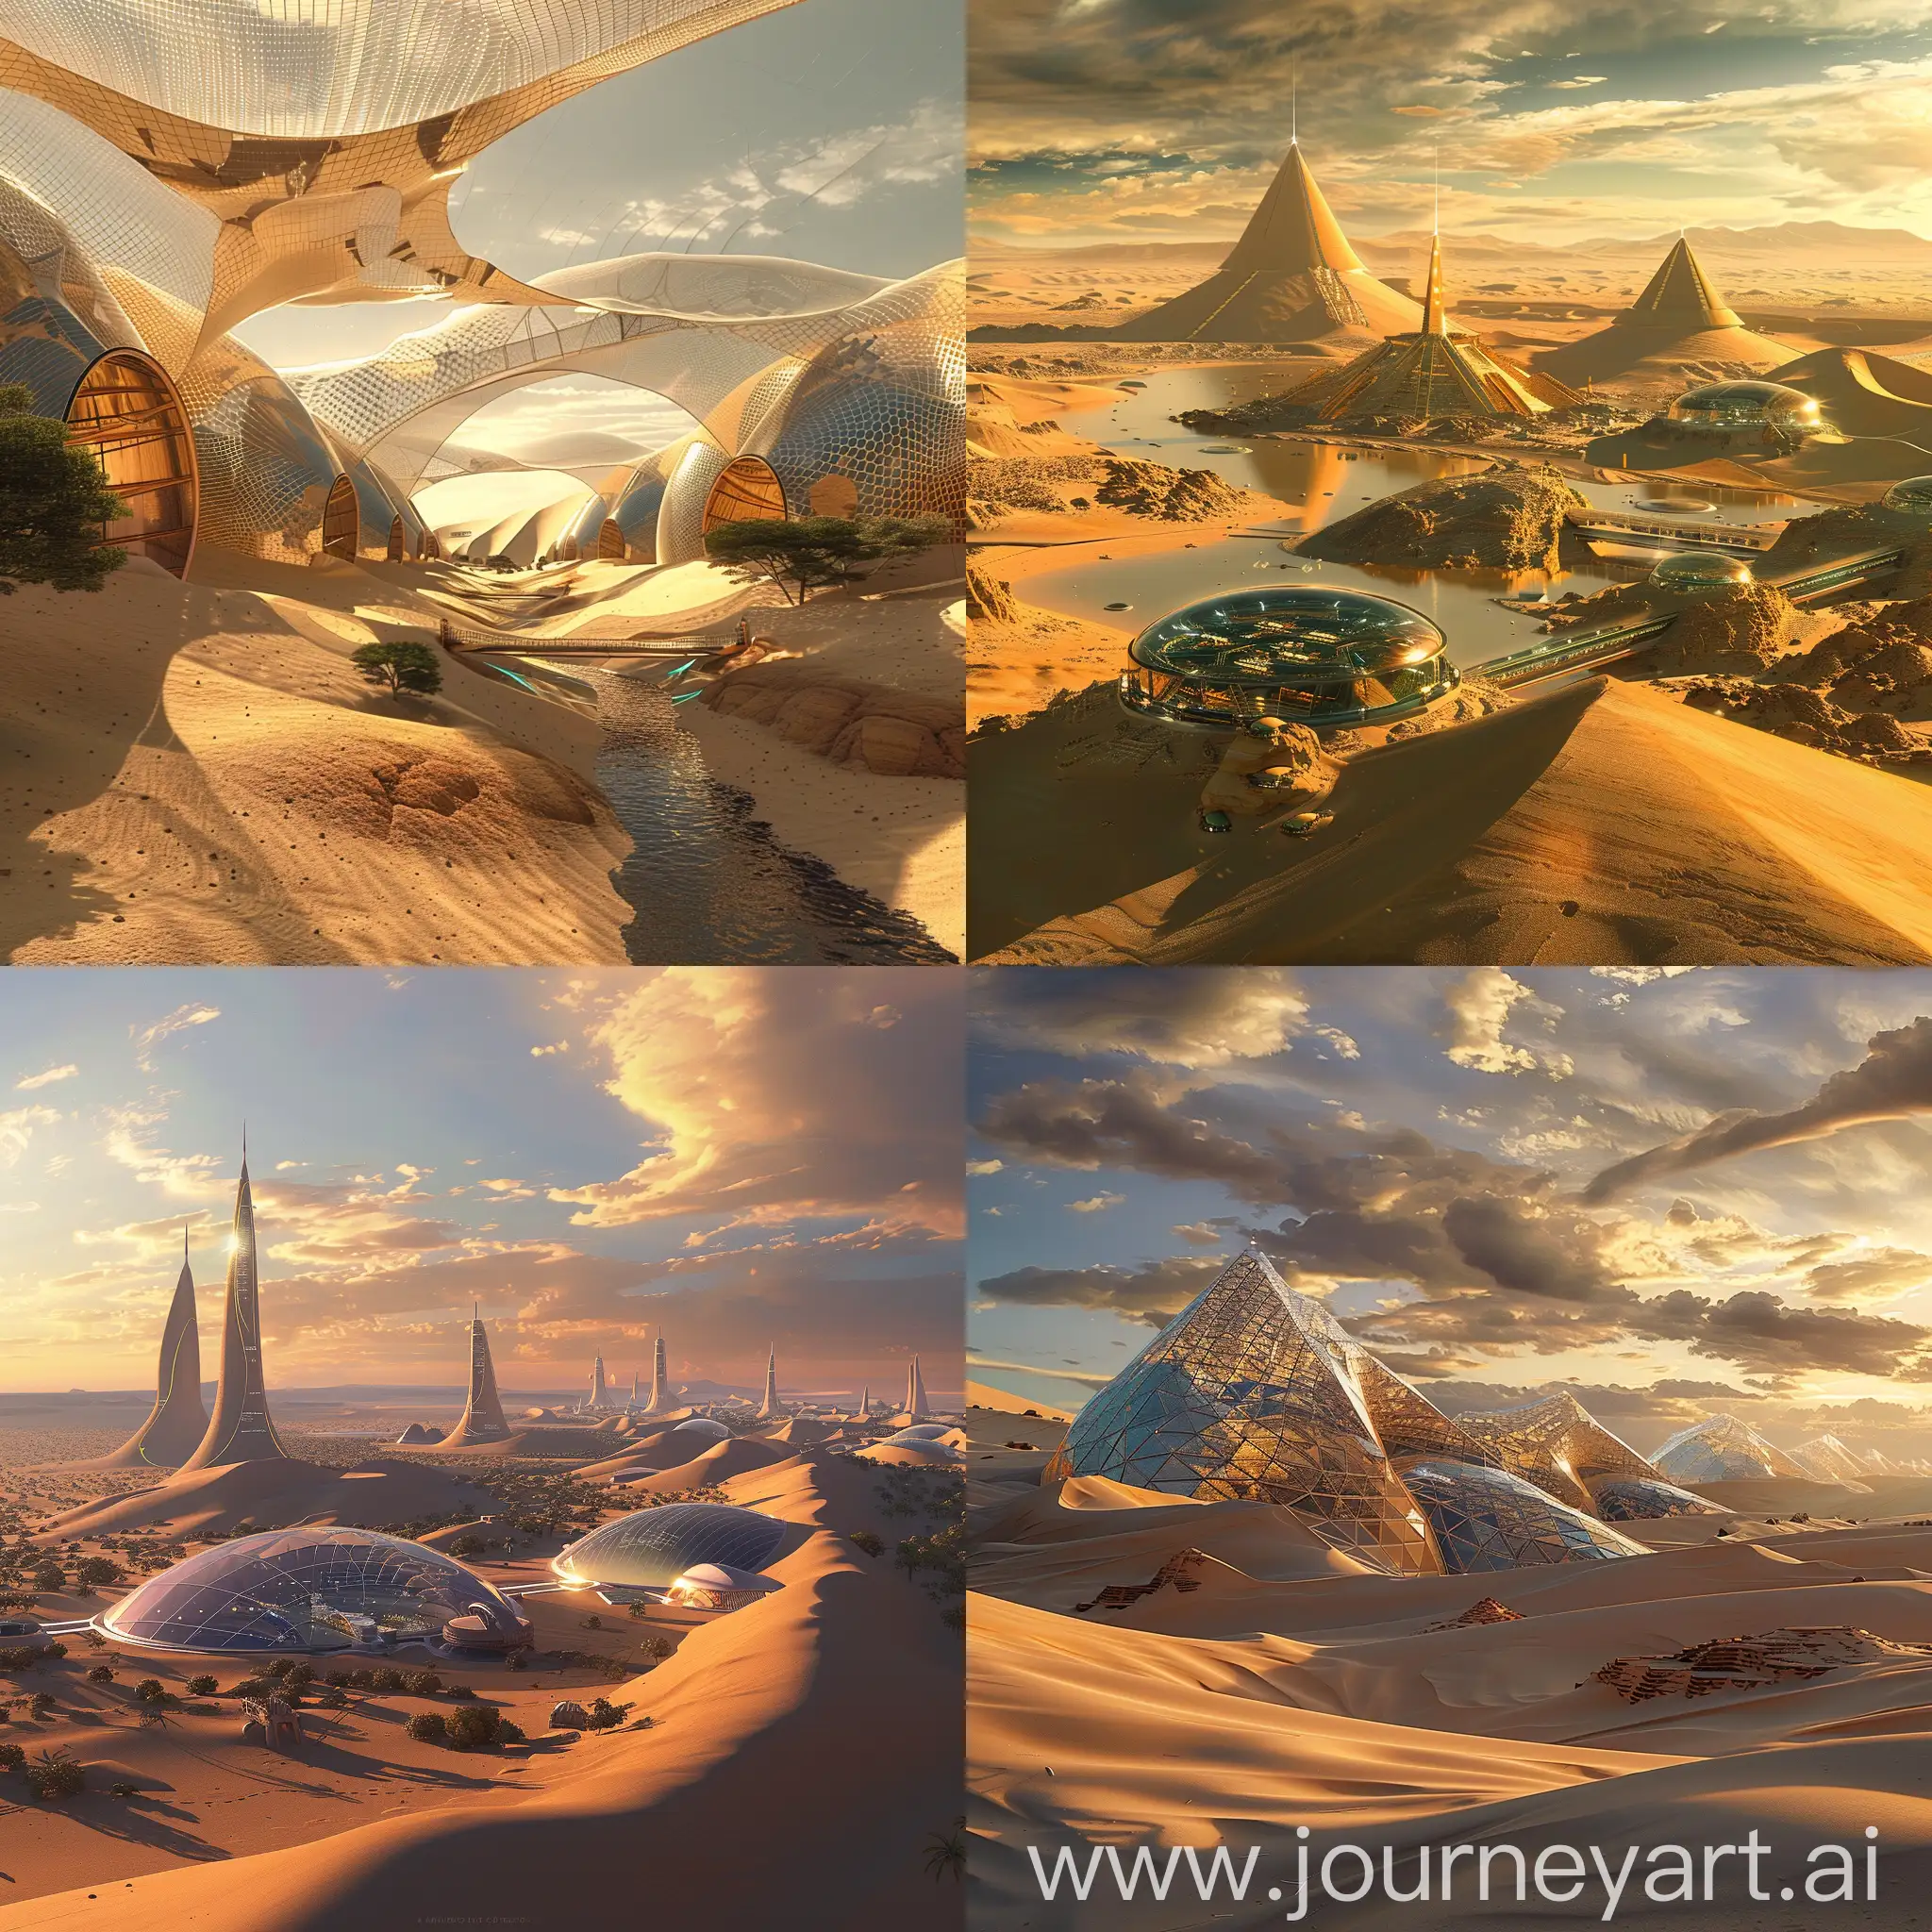 SciFi-Sahara-Desert-Advanced-Technology-and-Robotic-Oasis-Managers